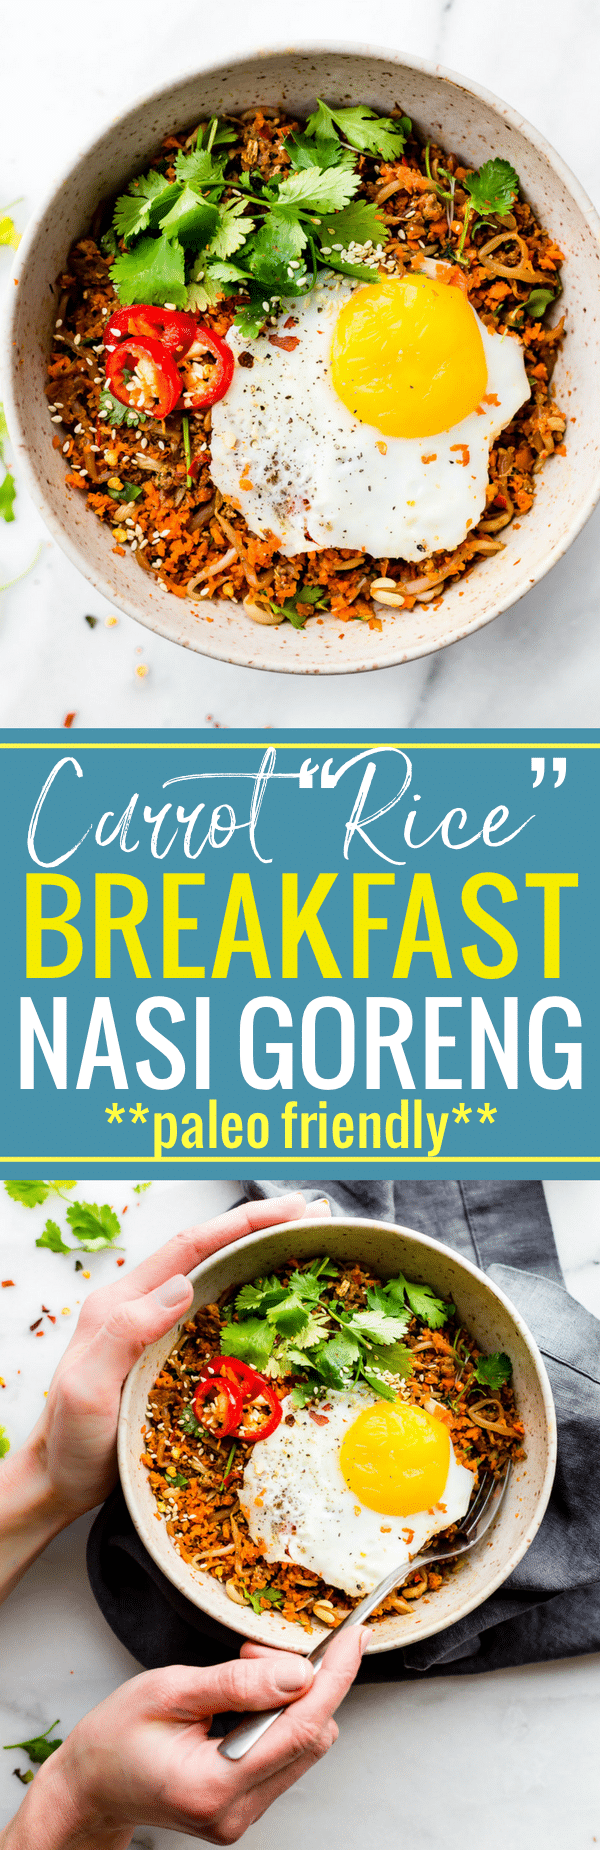 This Quick Carrot Rice Breakfast Nasi Goreng is the perfect way to utilize those leftover veggies! A stir fried "carrot rice" mixed with egg and sausage. A Indonesian style breakfast Nasi Goreng that's paleo friendly, super flavorful, and packed full of protein and veggies! Cook and serve all in 30 minutes! www.cottercrunch.com